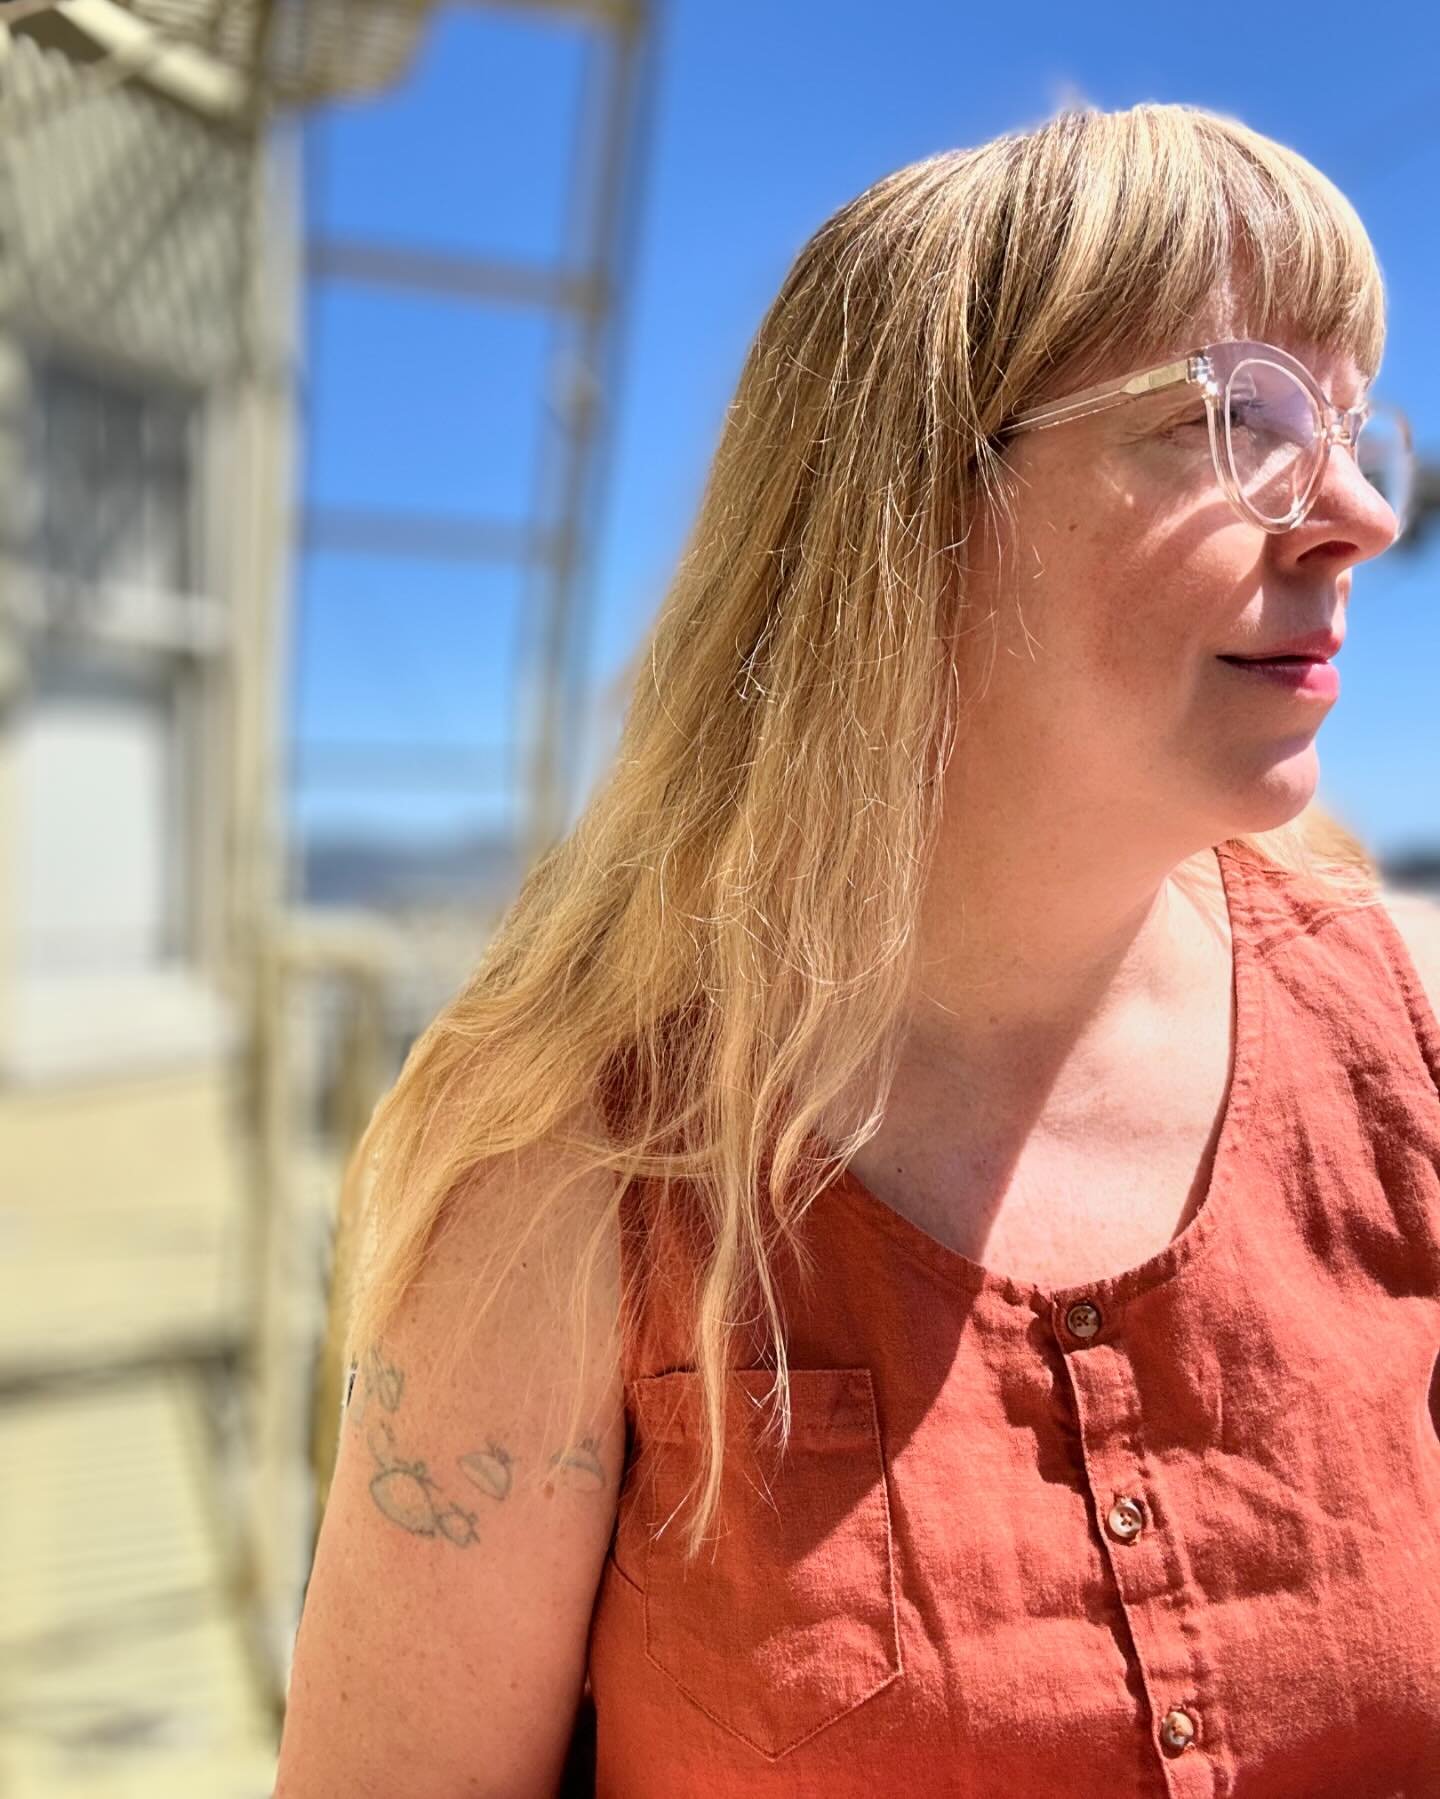 It&rsquo;s sunny and pushing 80&deg; here in San Francisco, so for today&rsquo;s MMM I busted out an old Verano Tank dress and soaked up some sunshine on my fire escape. This is one of 8 views of my pattern, and if I may say so myself, I think it&rsq